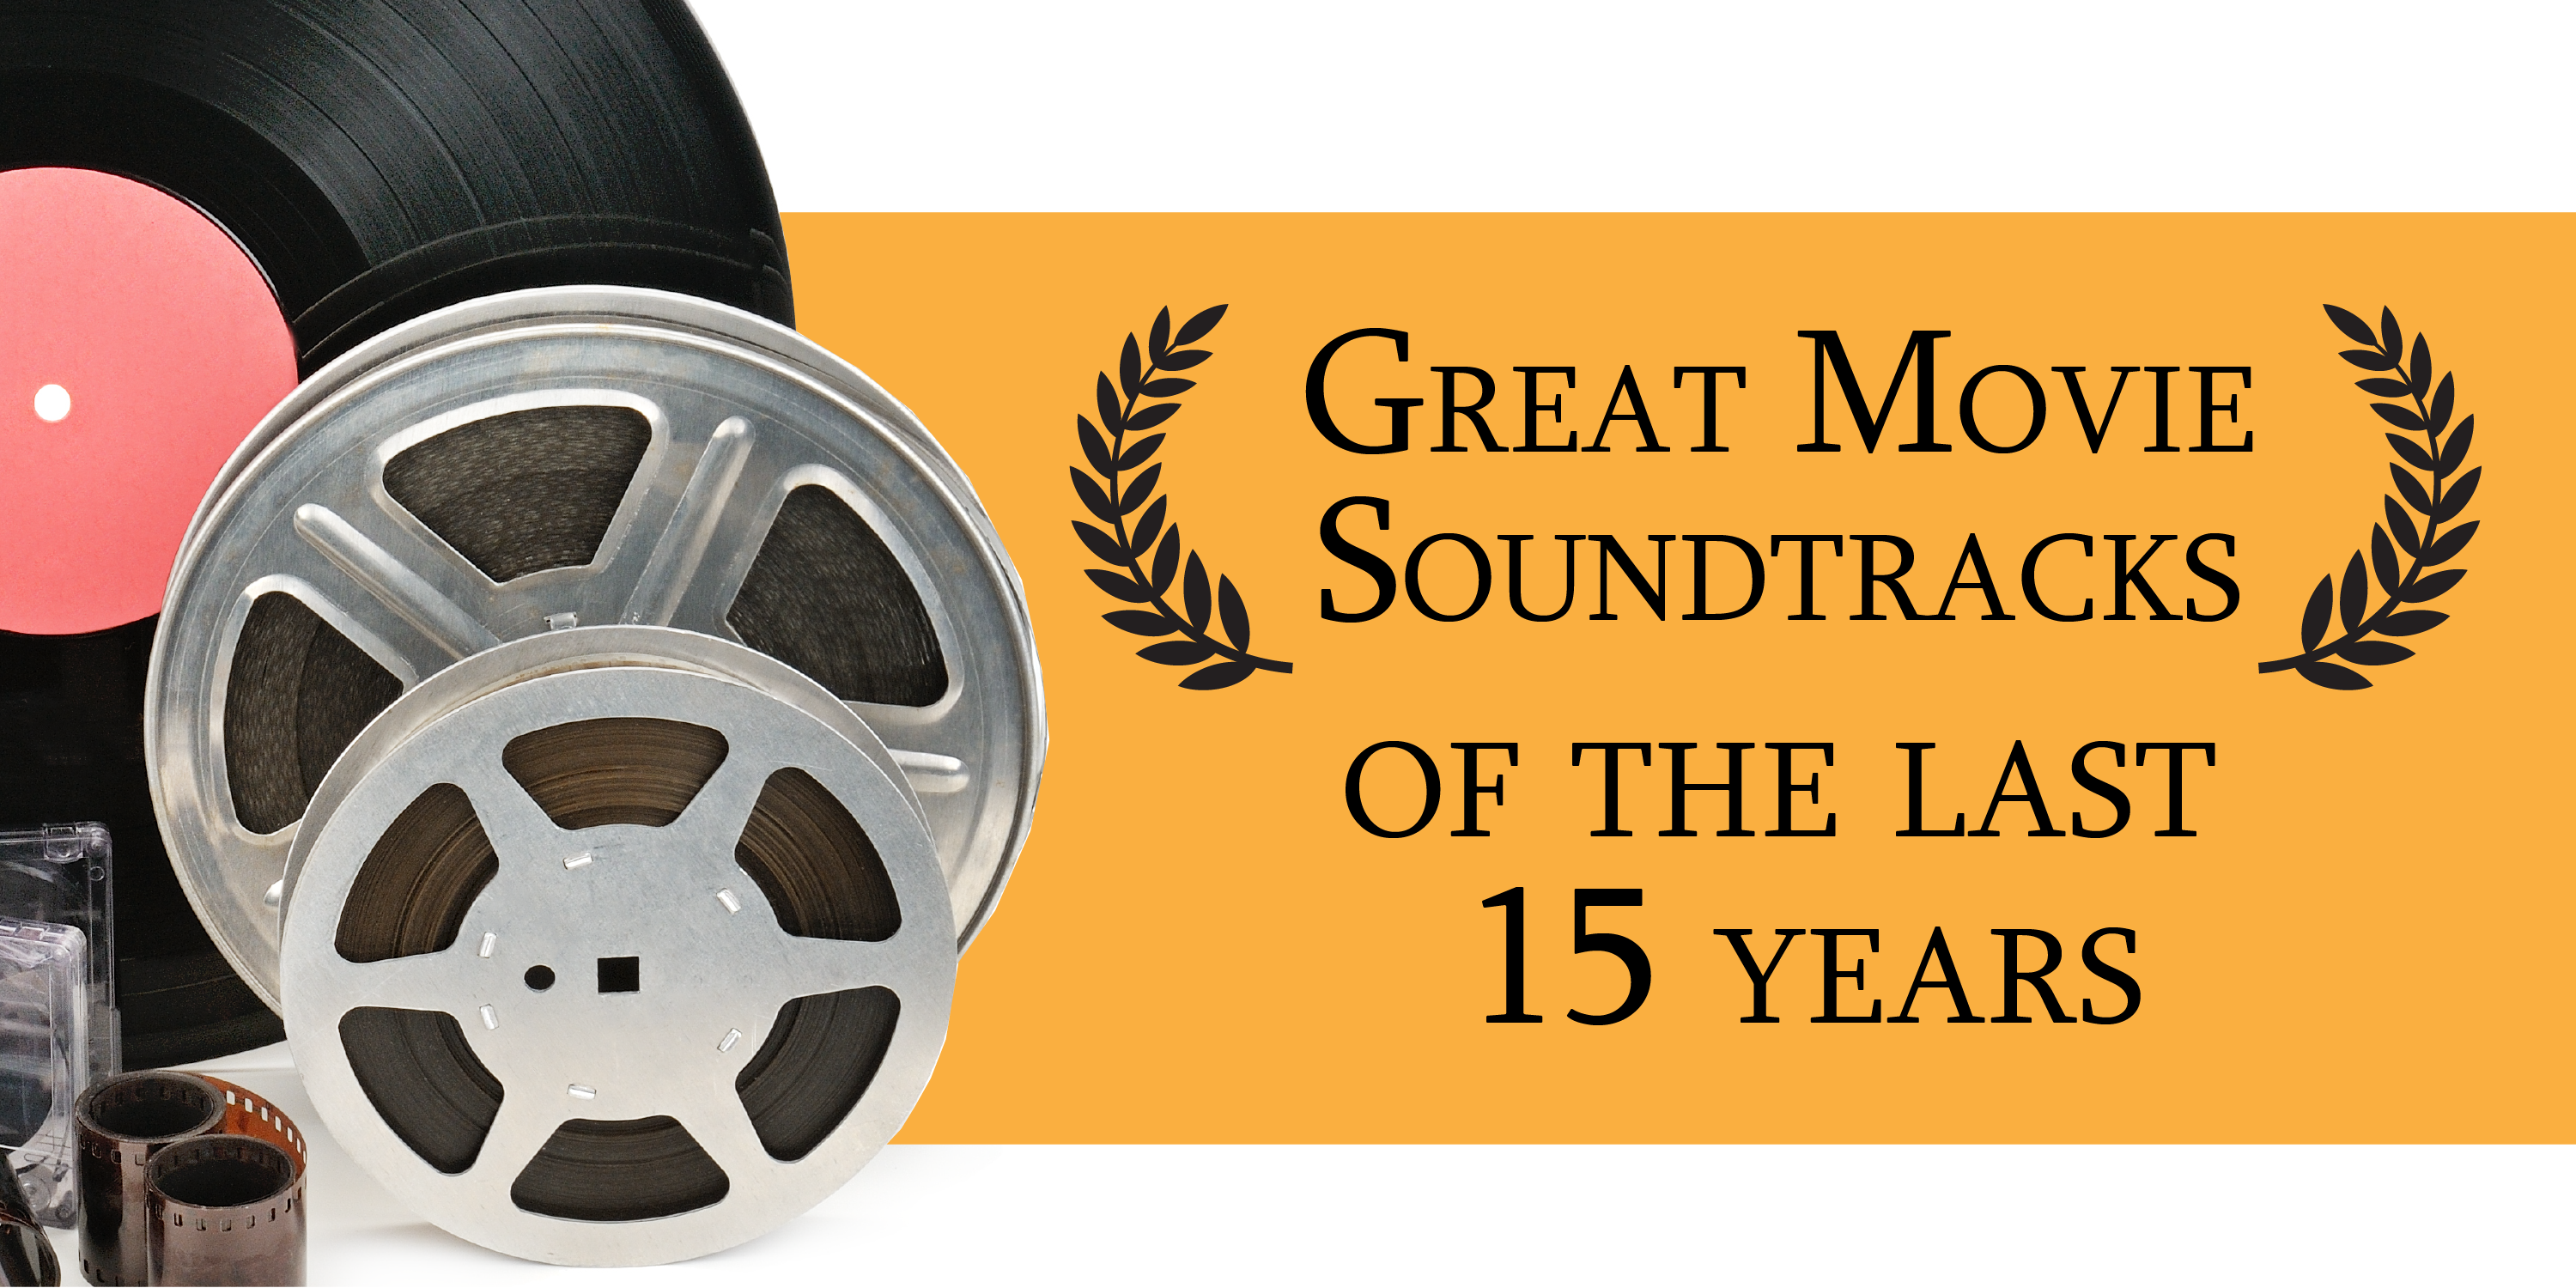 Great Movie Soundtracks of the Last 15 Years